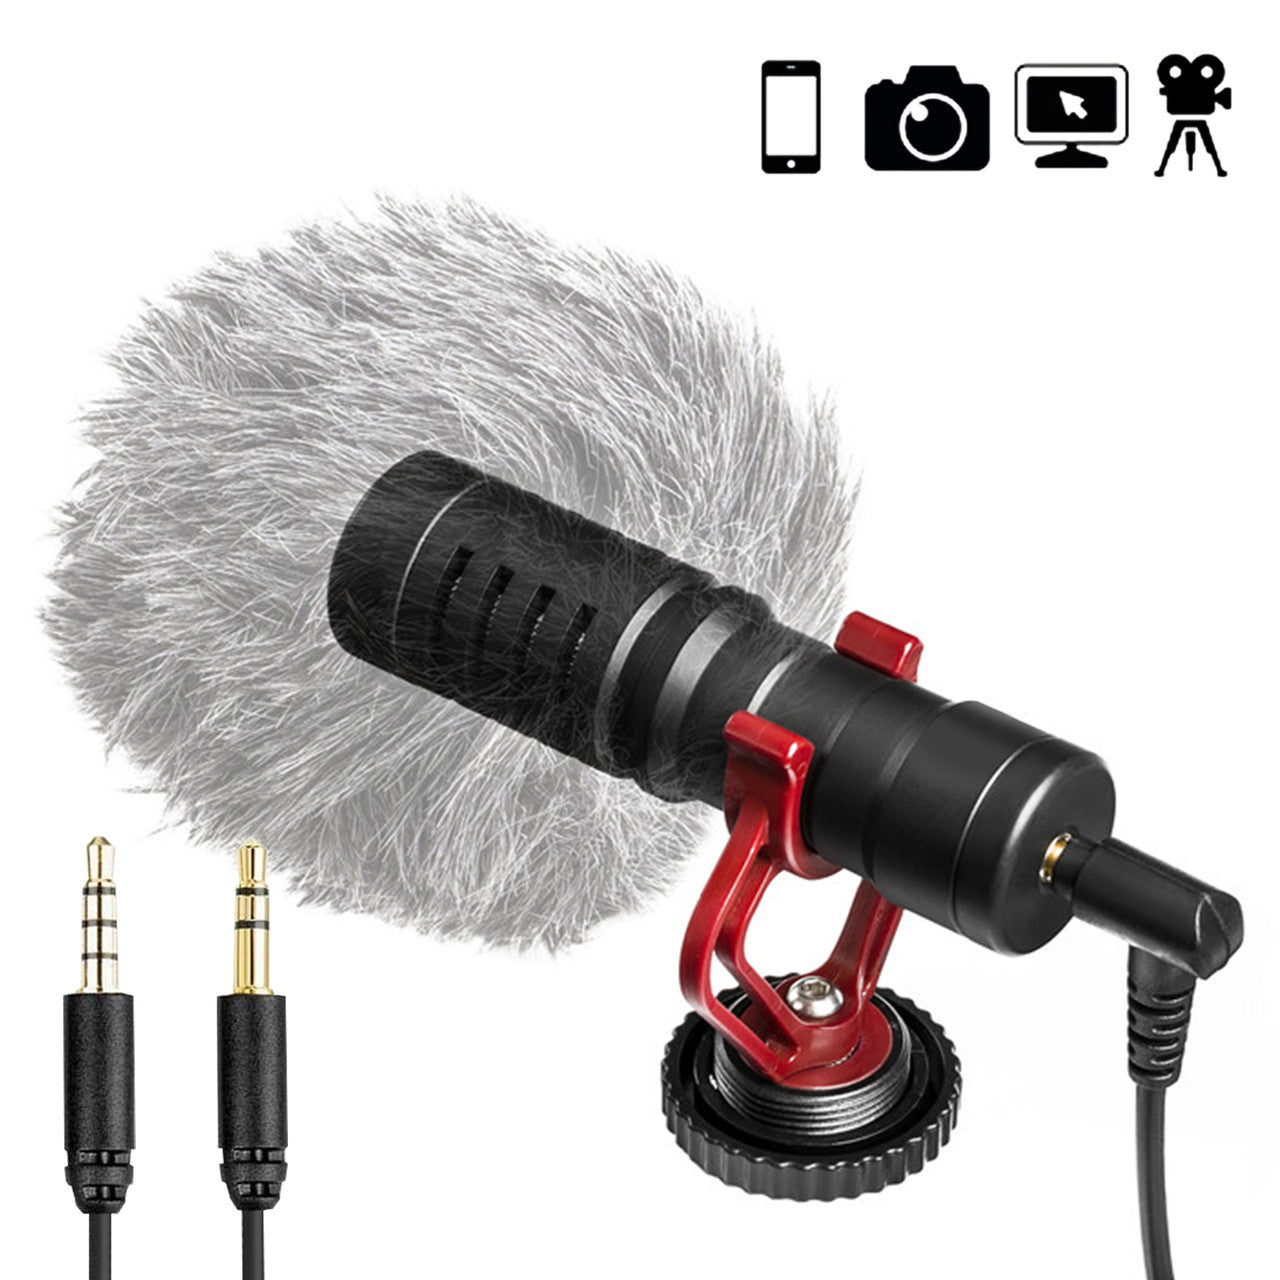 Camera Video Microphone, 3.5mm Professional Cardioid Recording Shotgun Microphone with Shock Mount, Windscreen, Carrying Bag, Fit for DSLR, iPhone, Android, Canon/Nikon/Sony Camera, Camcorder